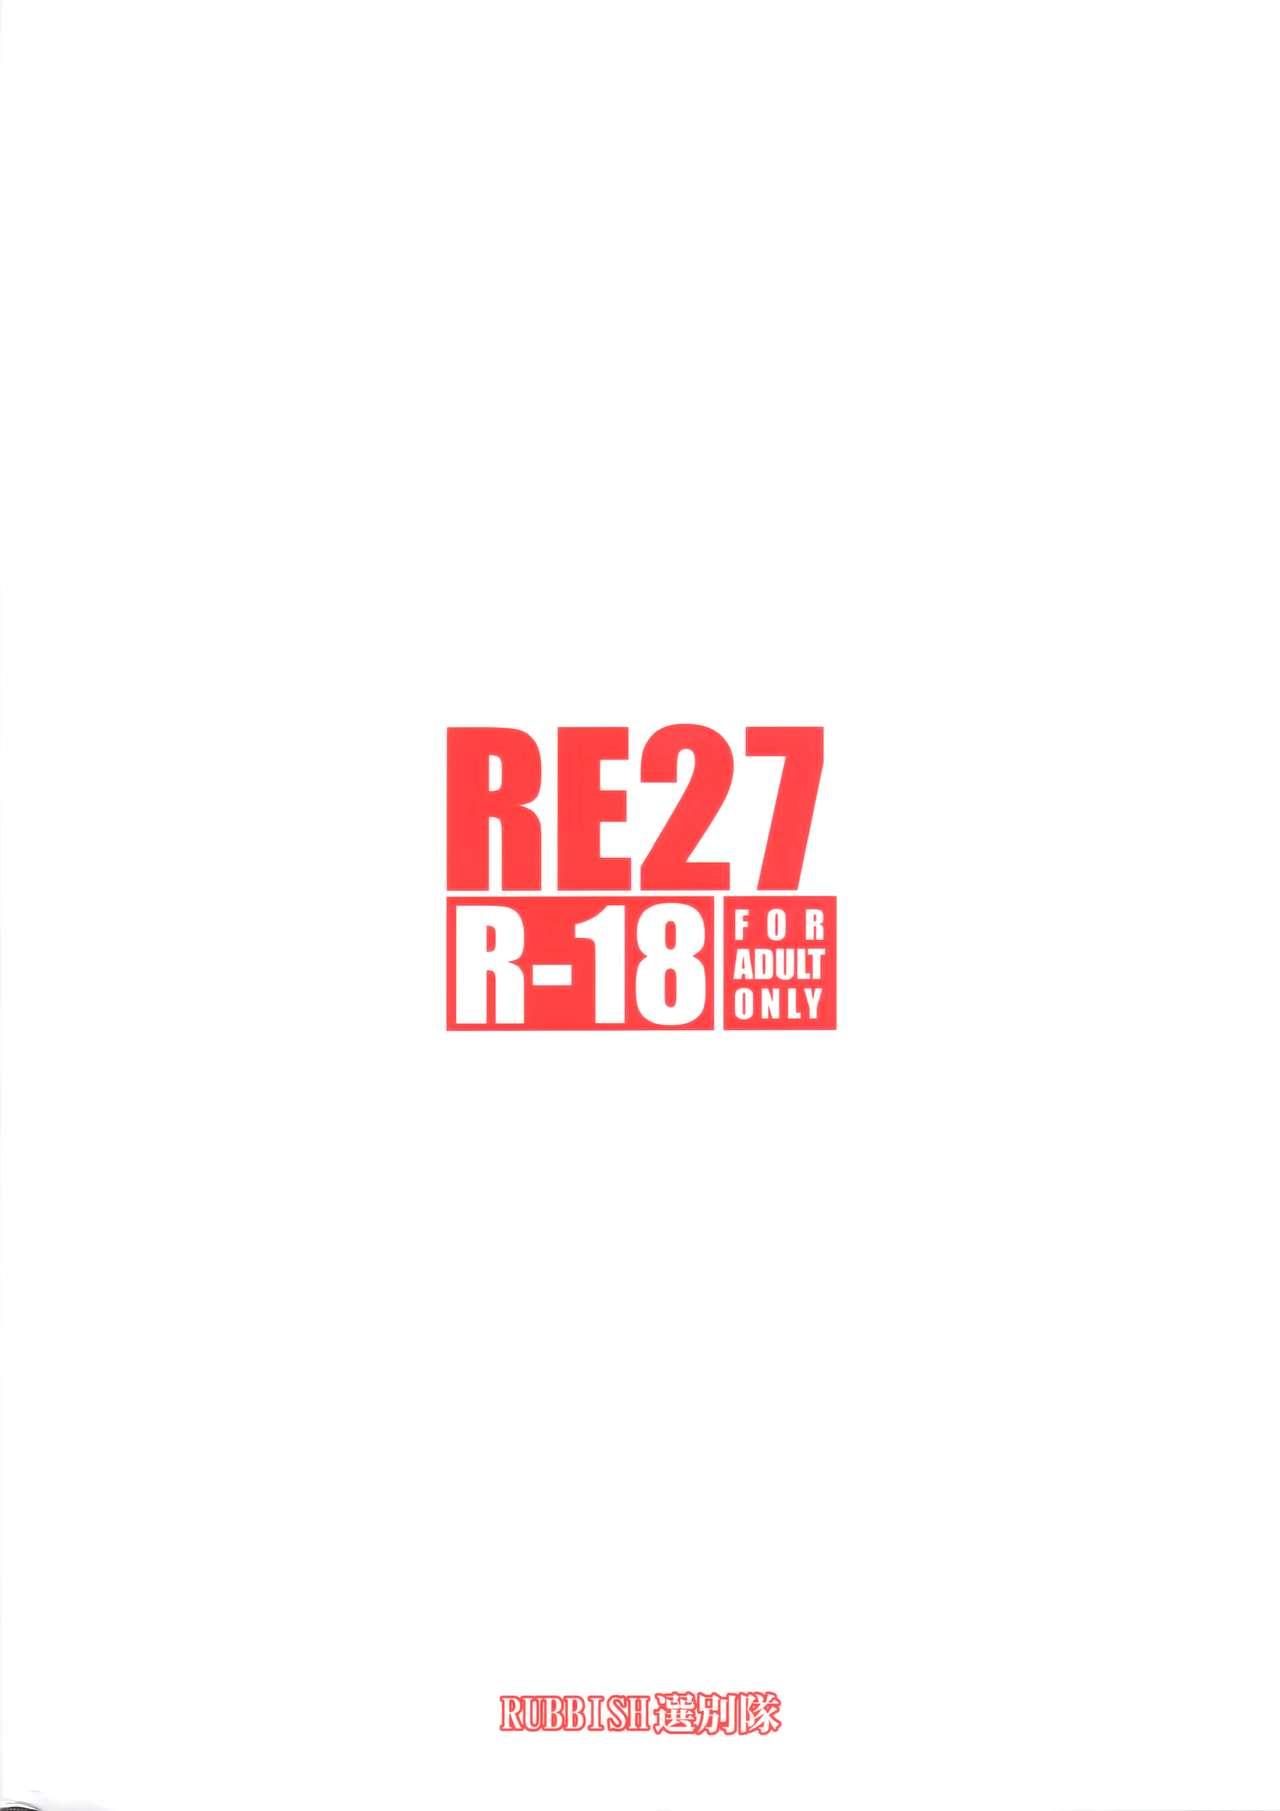 RE27 1